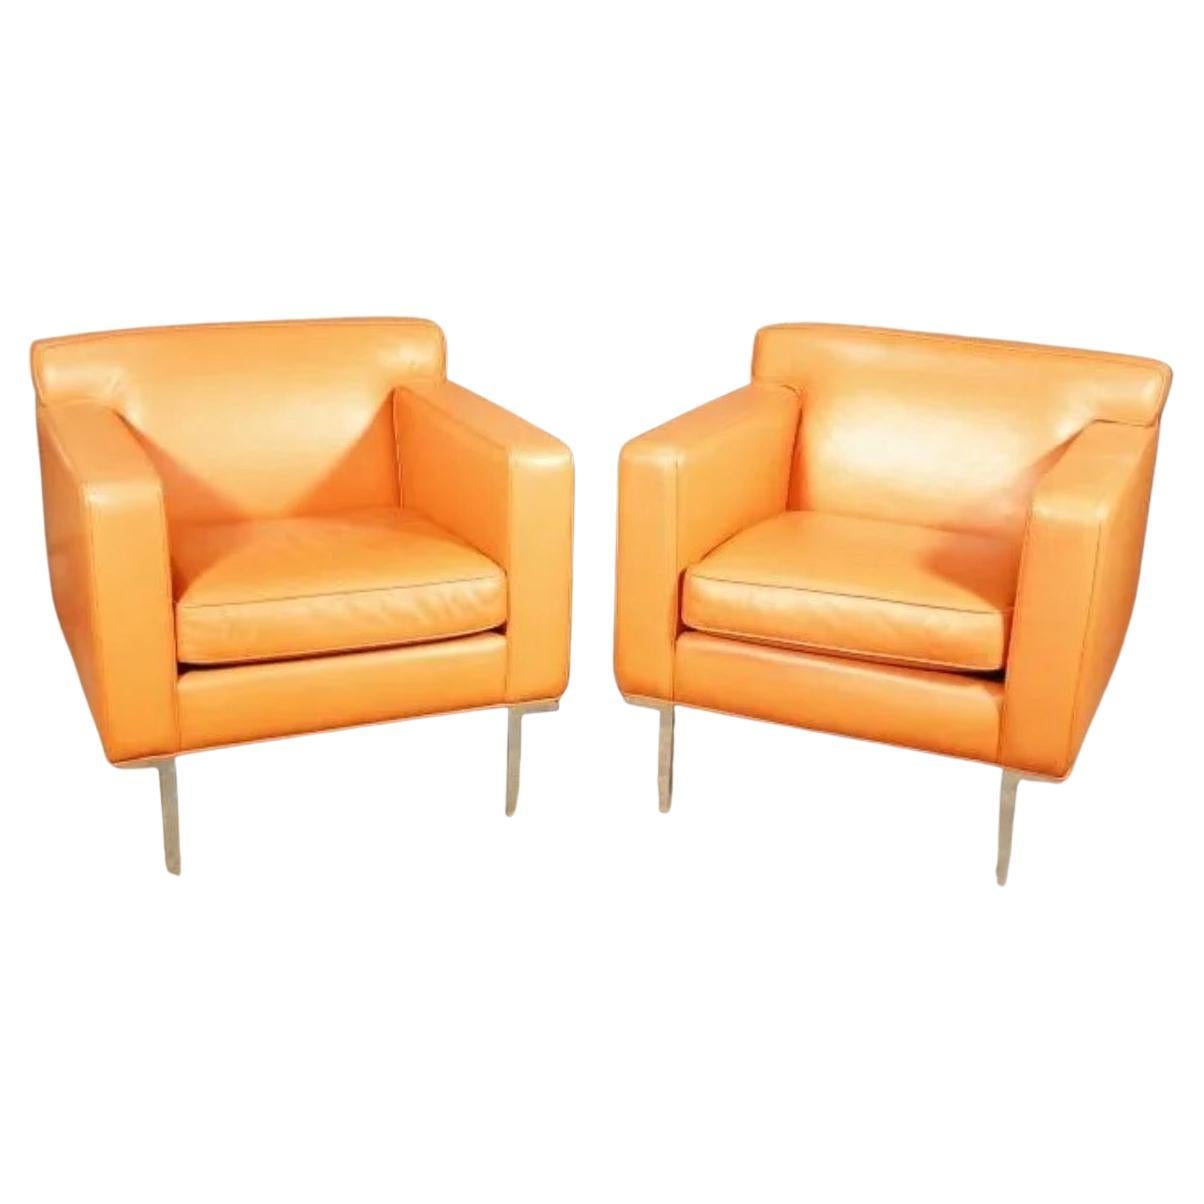 Pair of Chrome and Leather Armchairs